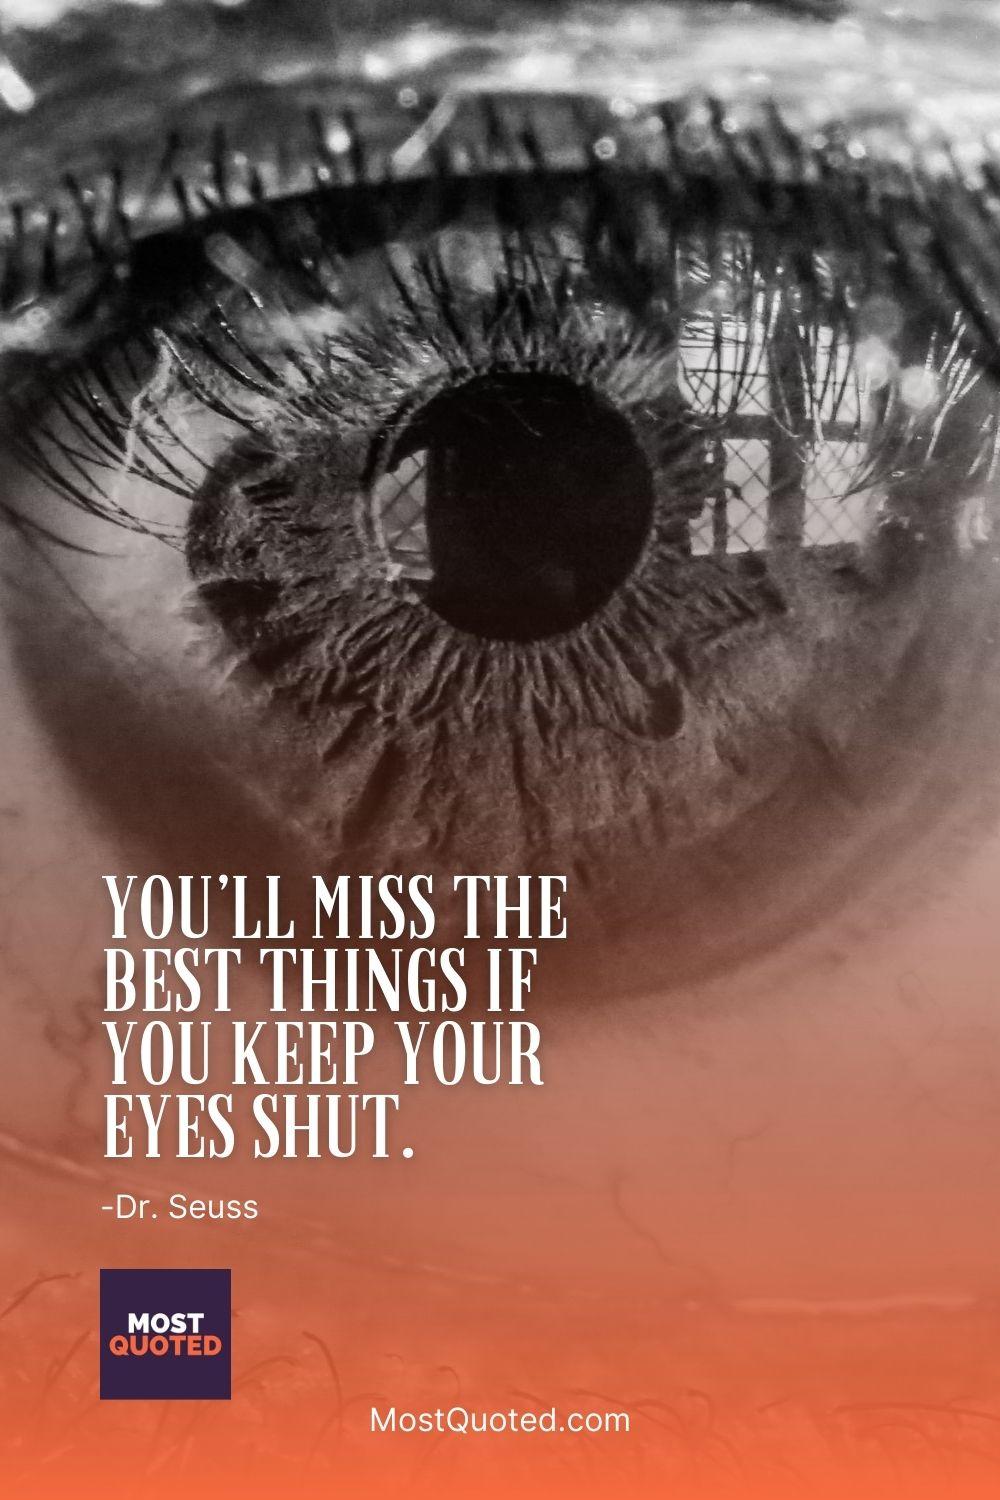 You’ll miss the best things if you keep your eyes shut. - Dr. Seuss